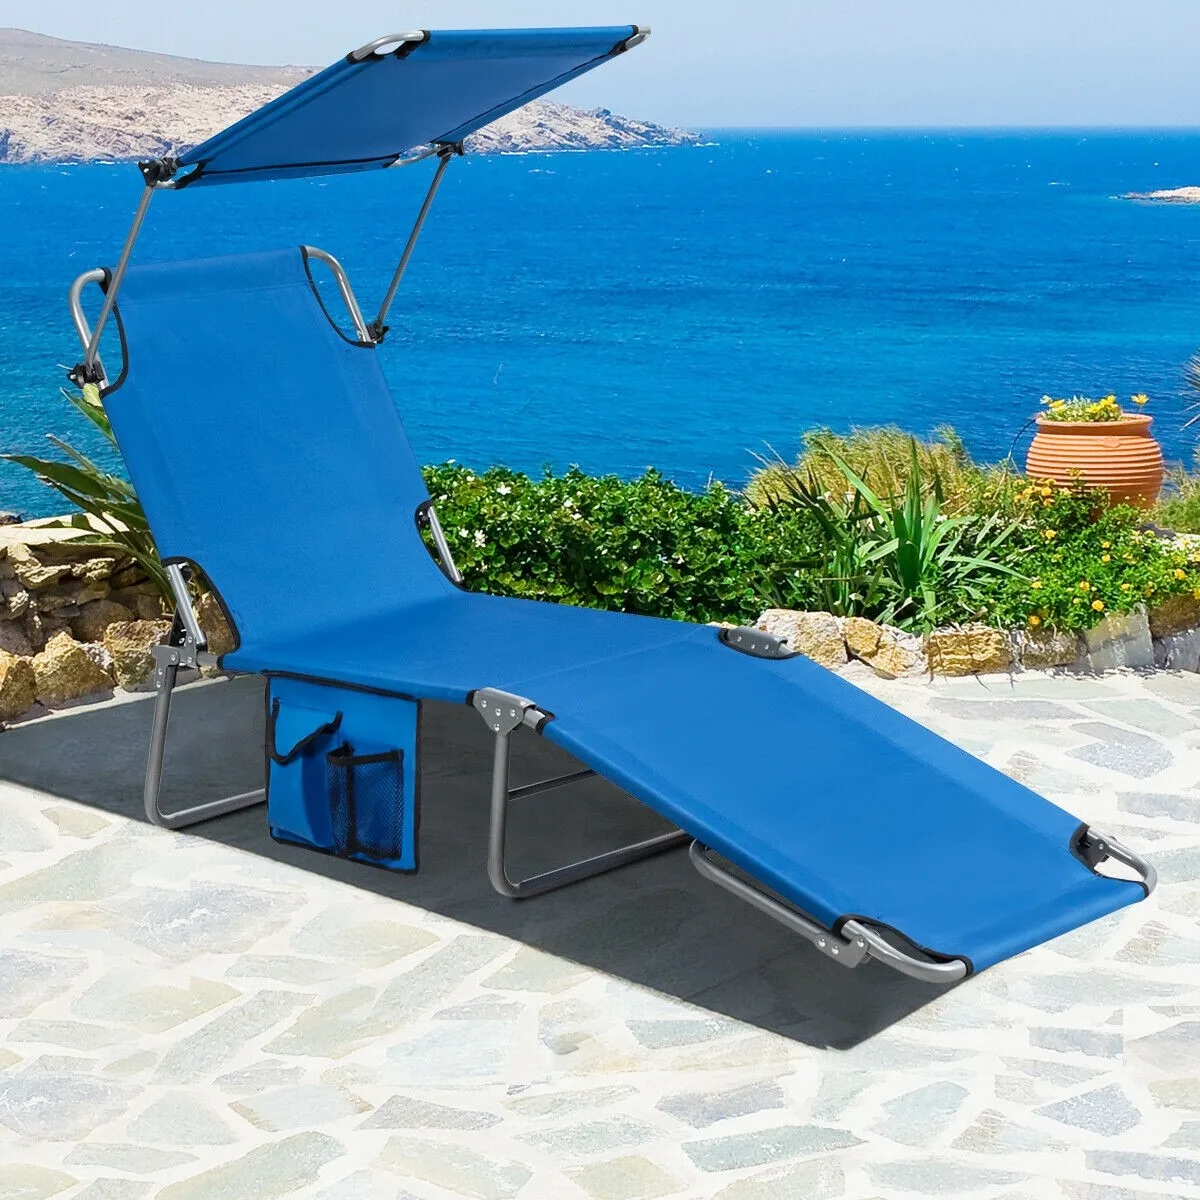 Folding Chair at Pool area with Canopy